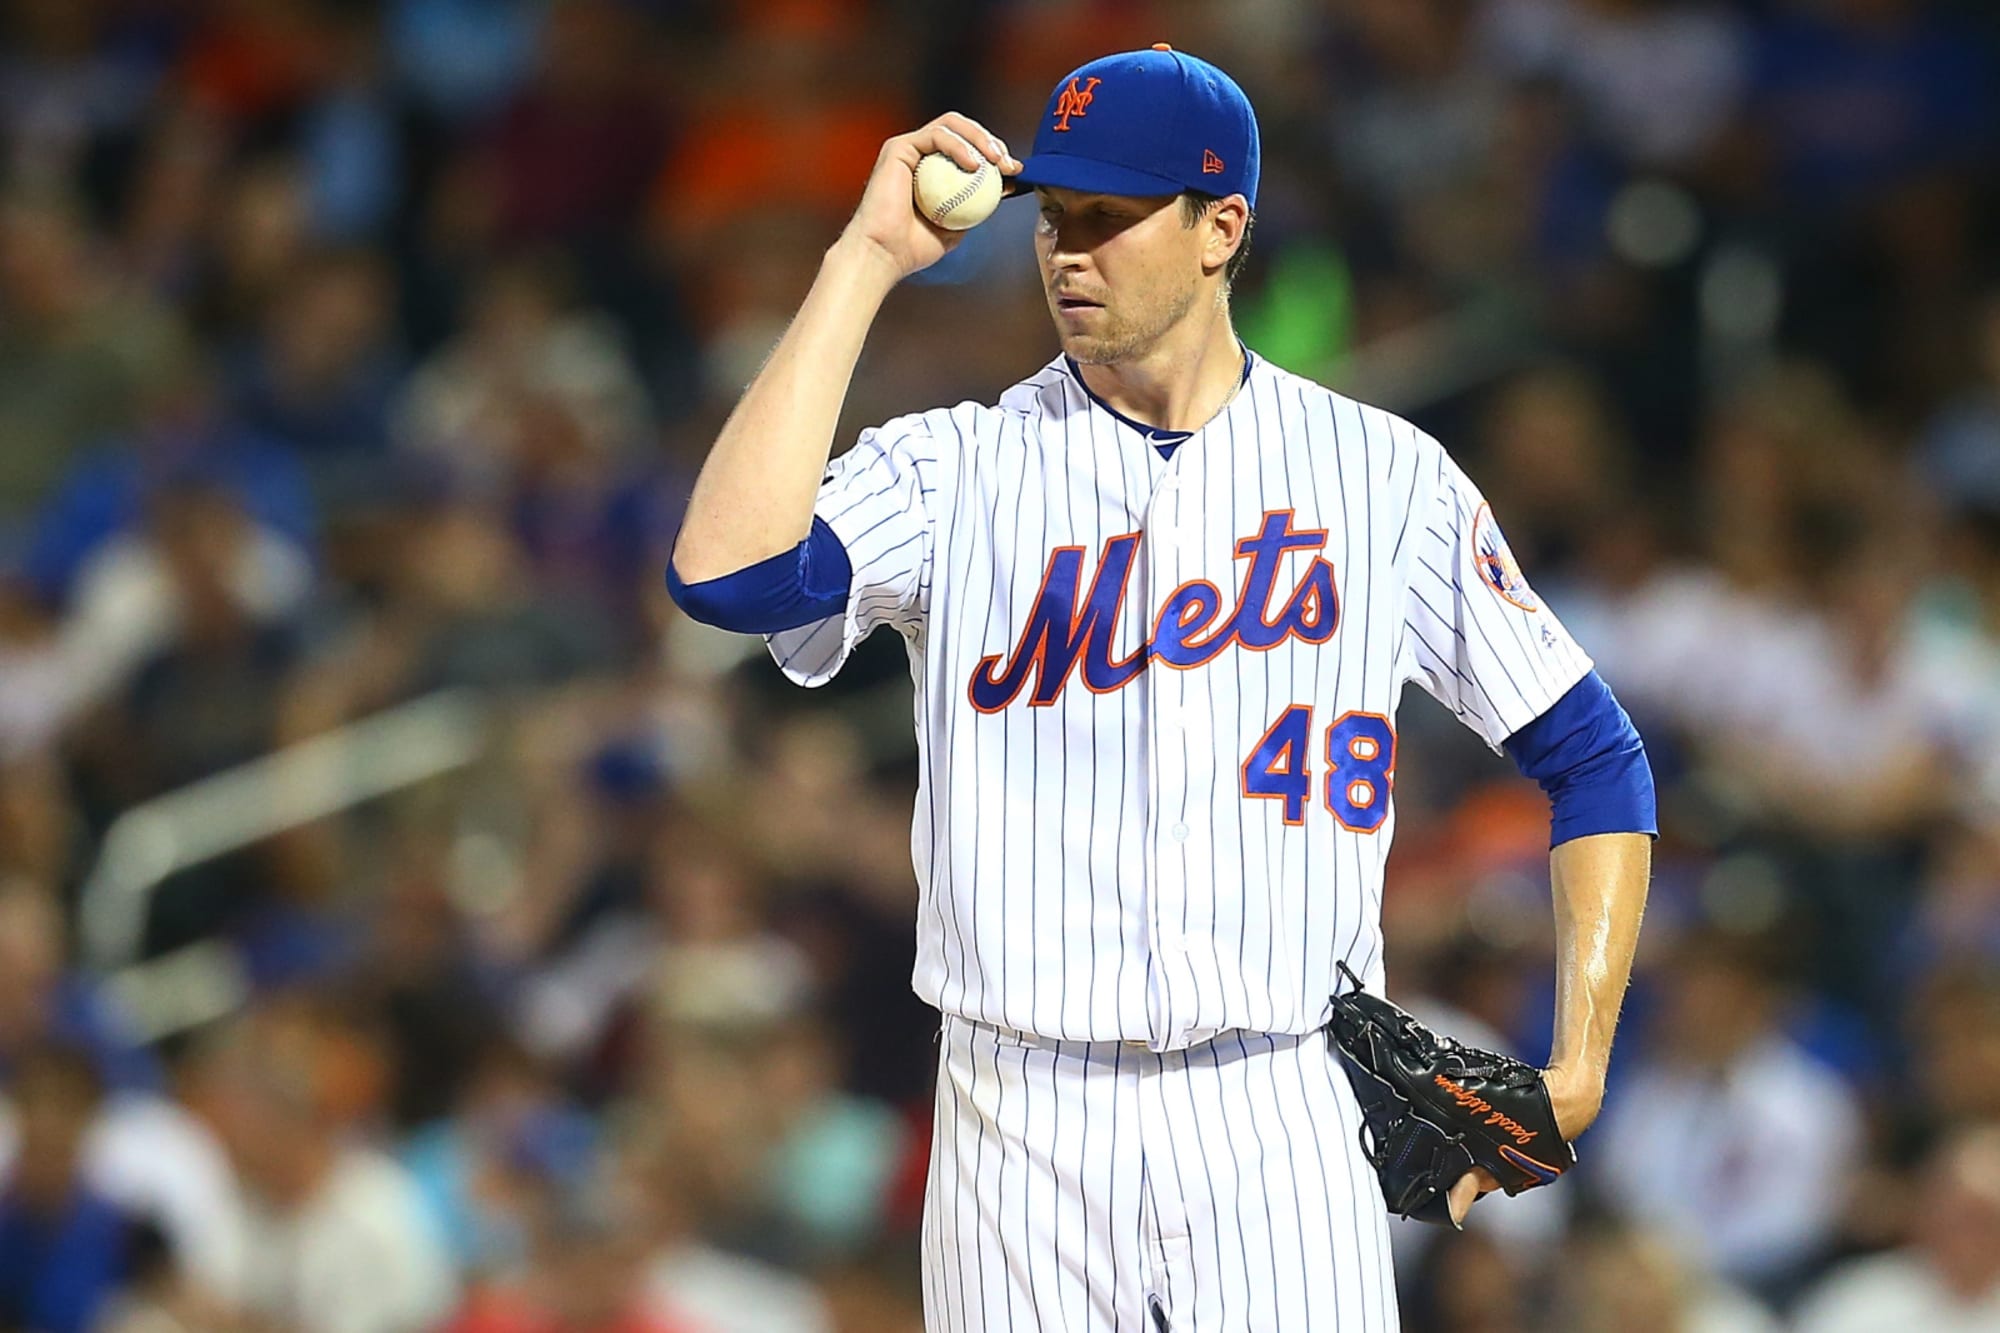 Jacob deGrom building NL Cy Young Award case